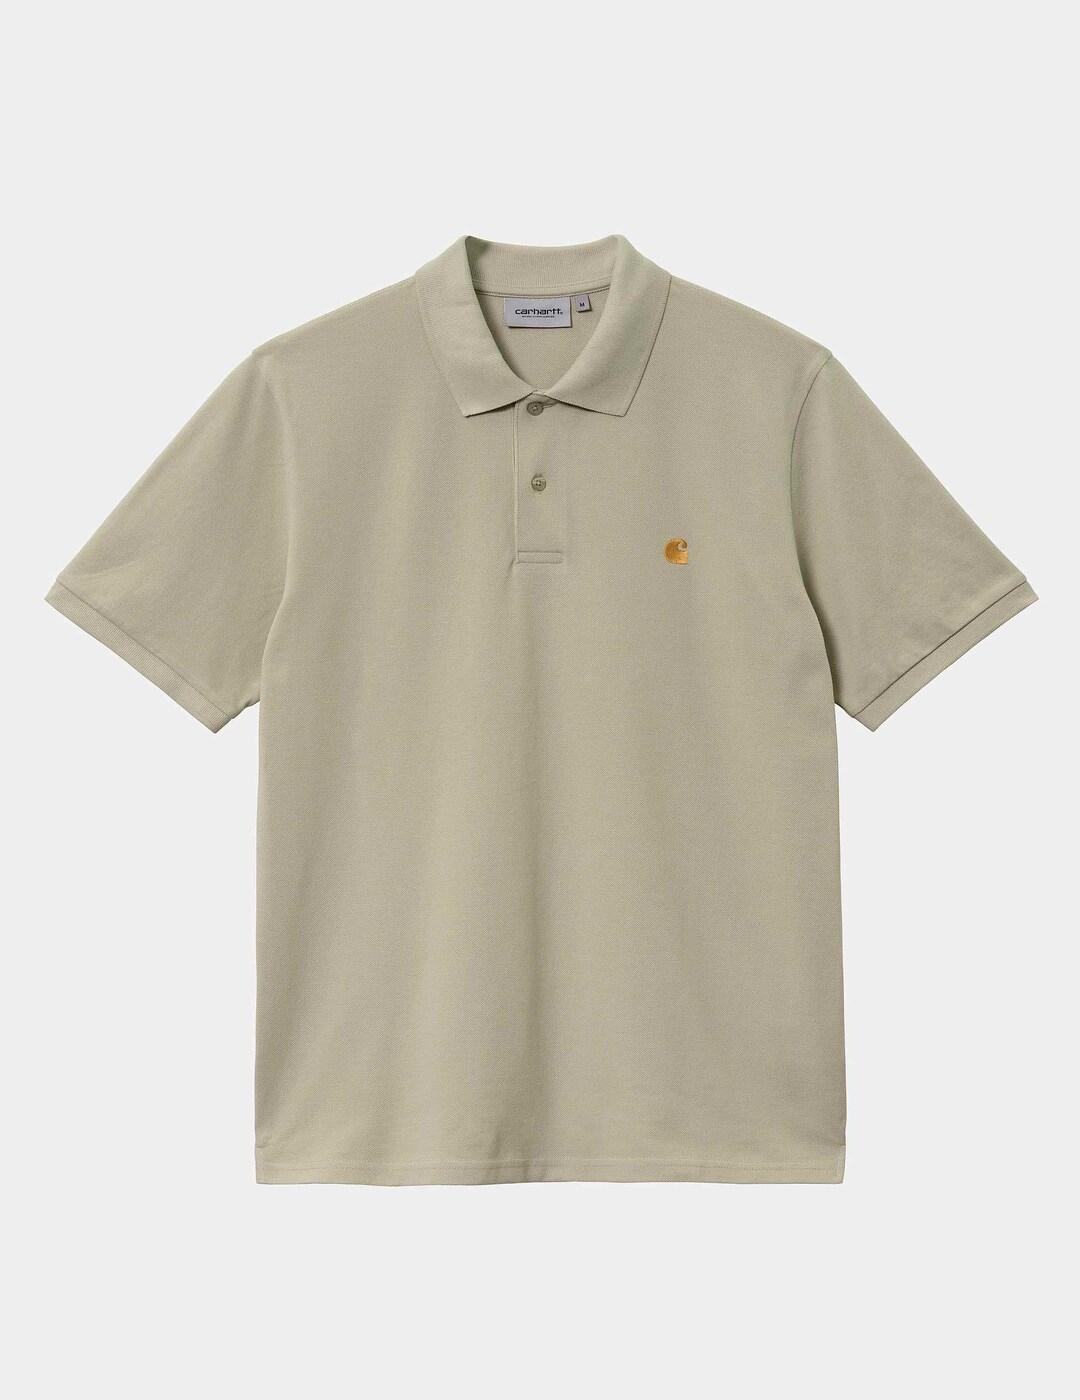 Polo CARHARTT CHASE PIQUE - Agave / Gold